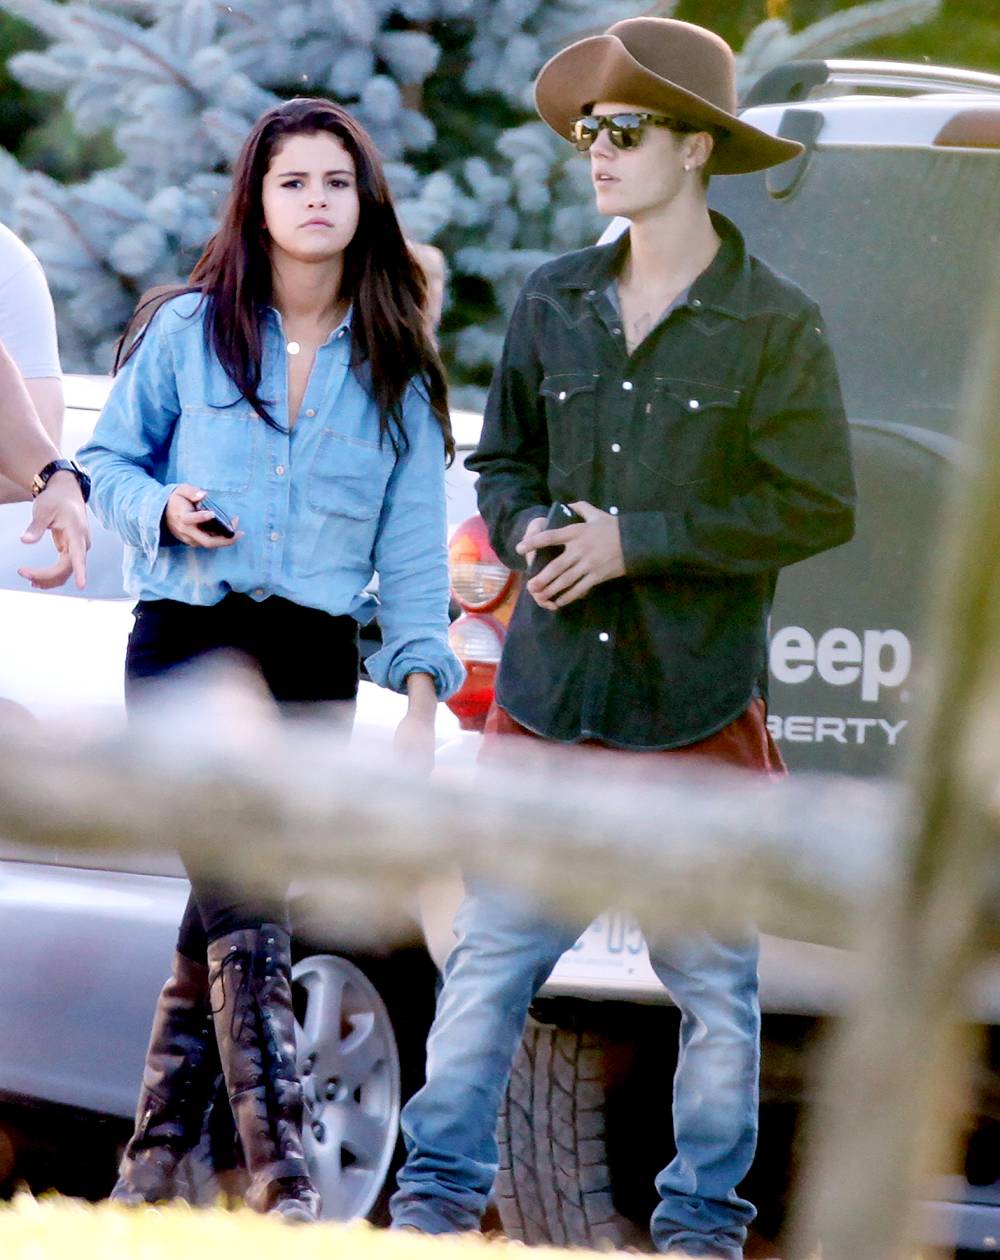 Selena Gomez joins Justin Bieber on a trip to Canada on Thursday August 28, 2014.